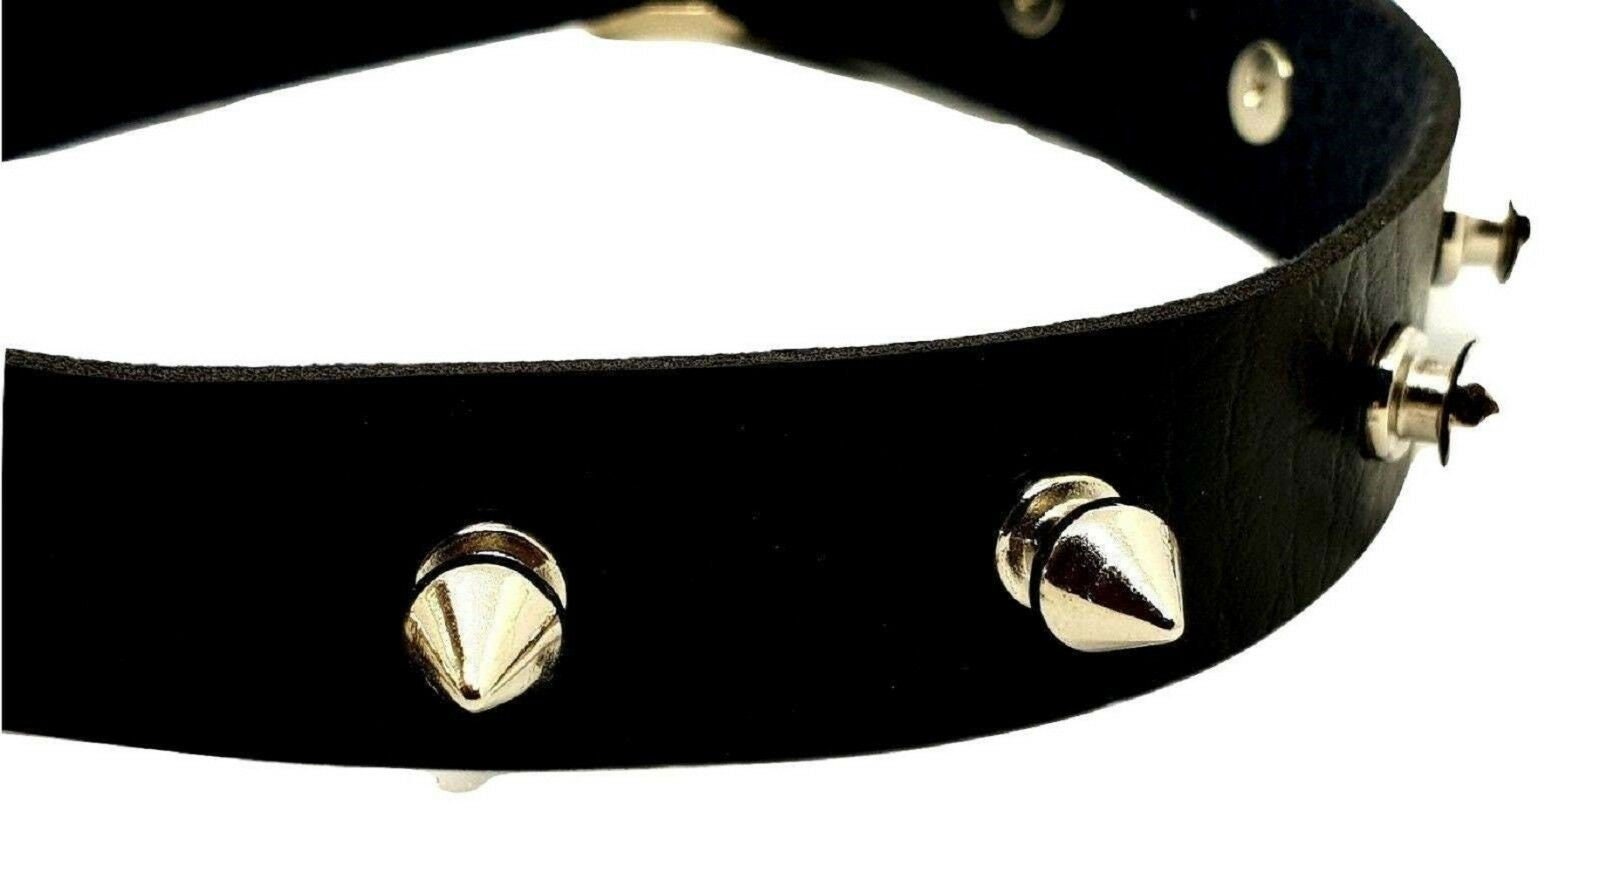 Gothic Punk Spiked Ring Faux Leather Collar Necklace Choker – Metal Band  T-Shirt